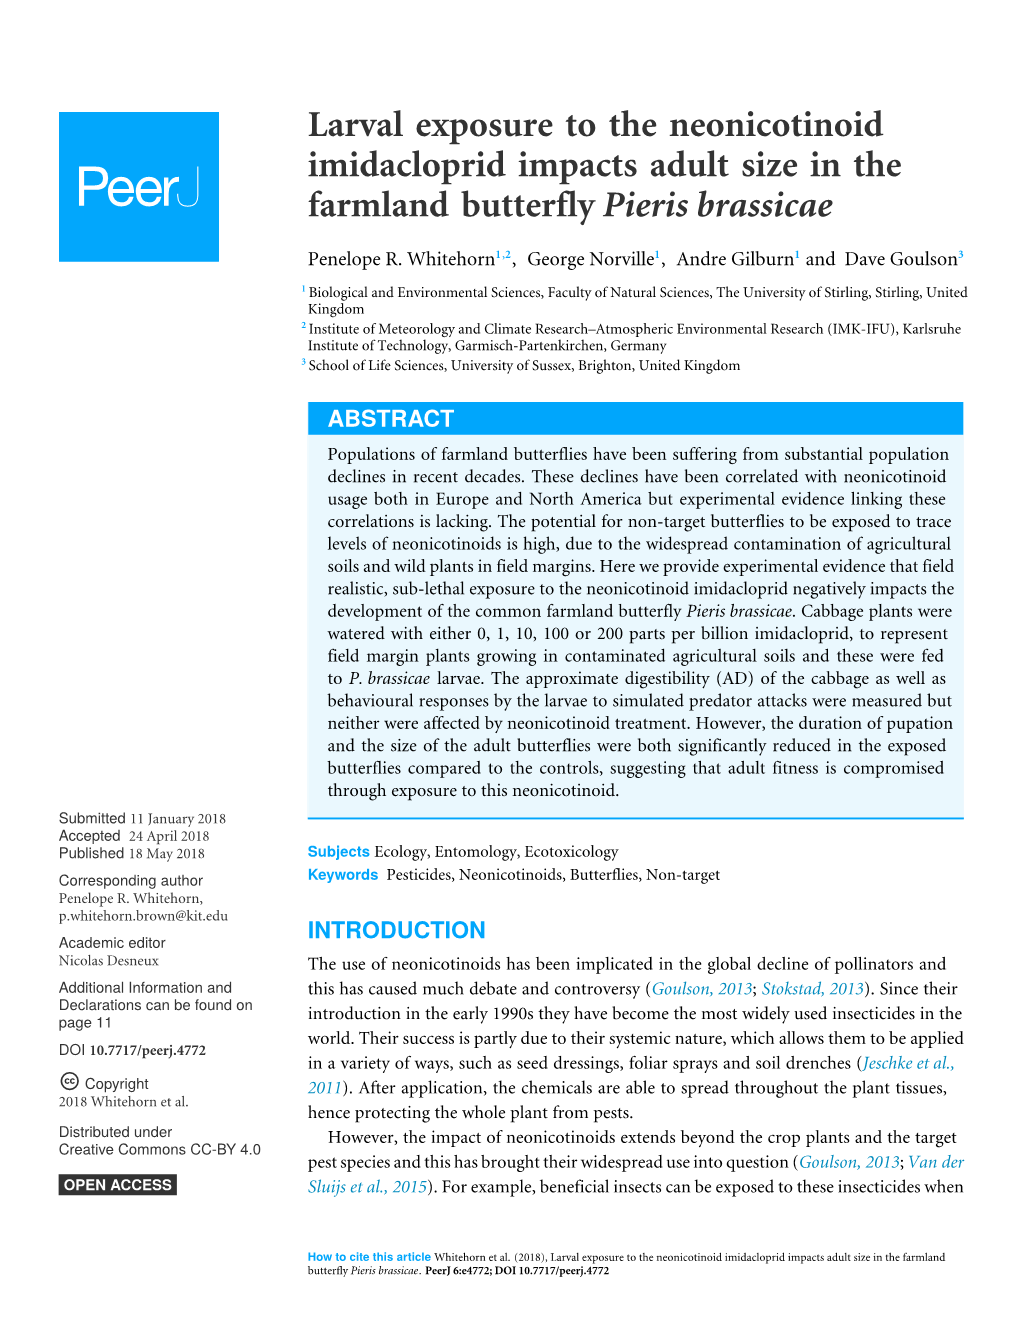 Larval Exposure to the Neonicotinoid Imidacloprid Impacts Adult Size in the Farmland Butterfly Pieris Brassicae